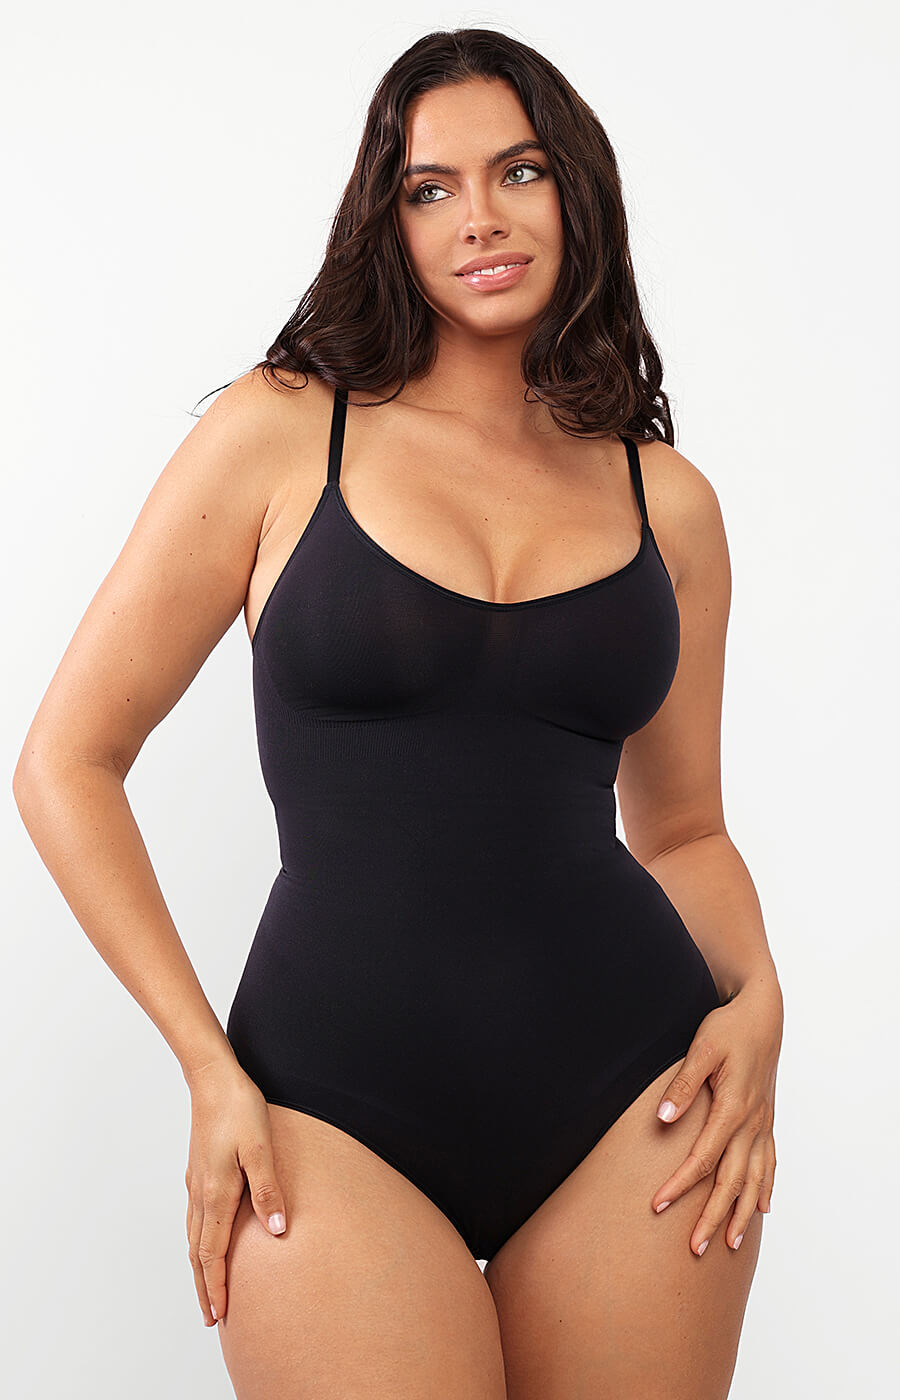 Use Shapellx AirSlim Shapewear For Sculpting and Shaping